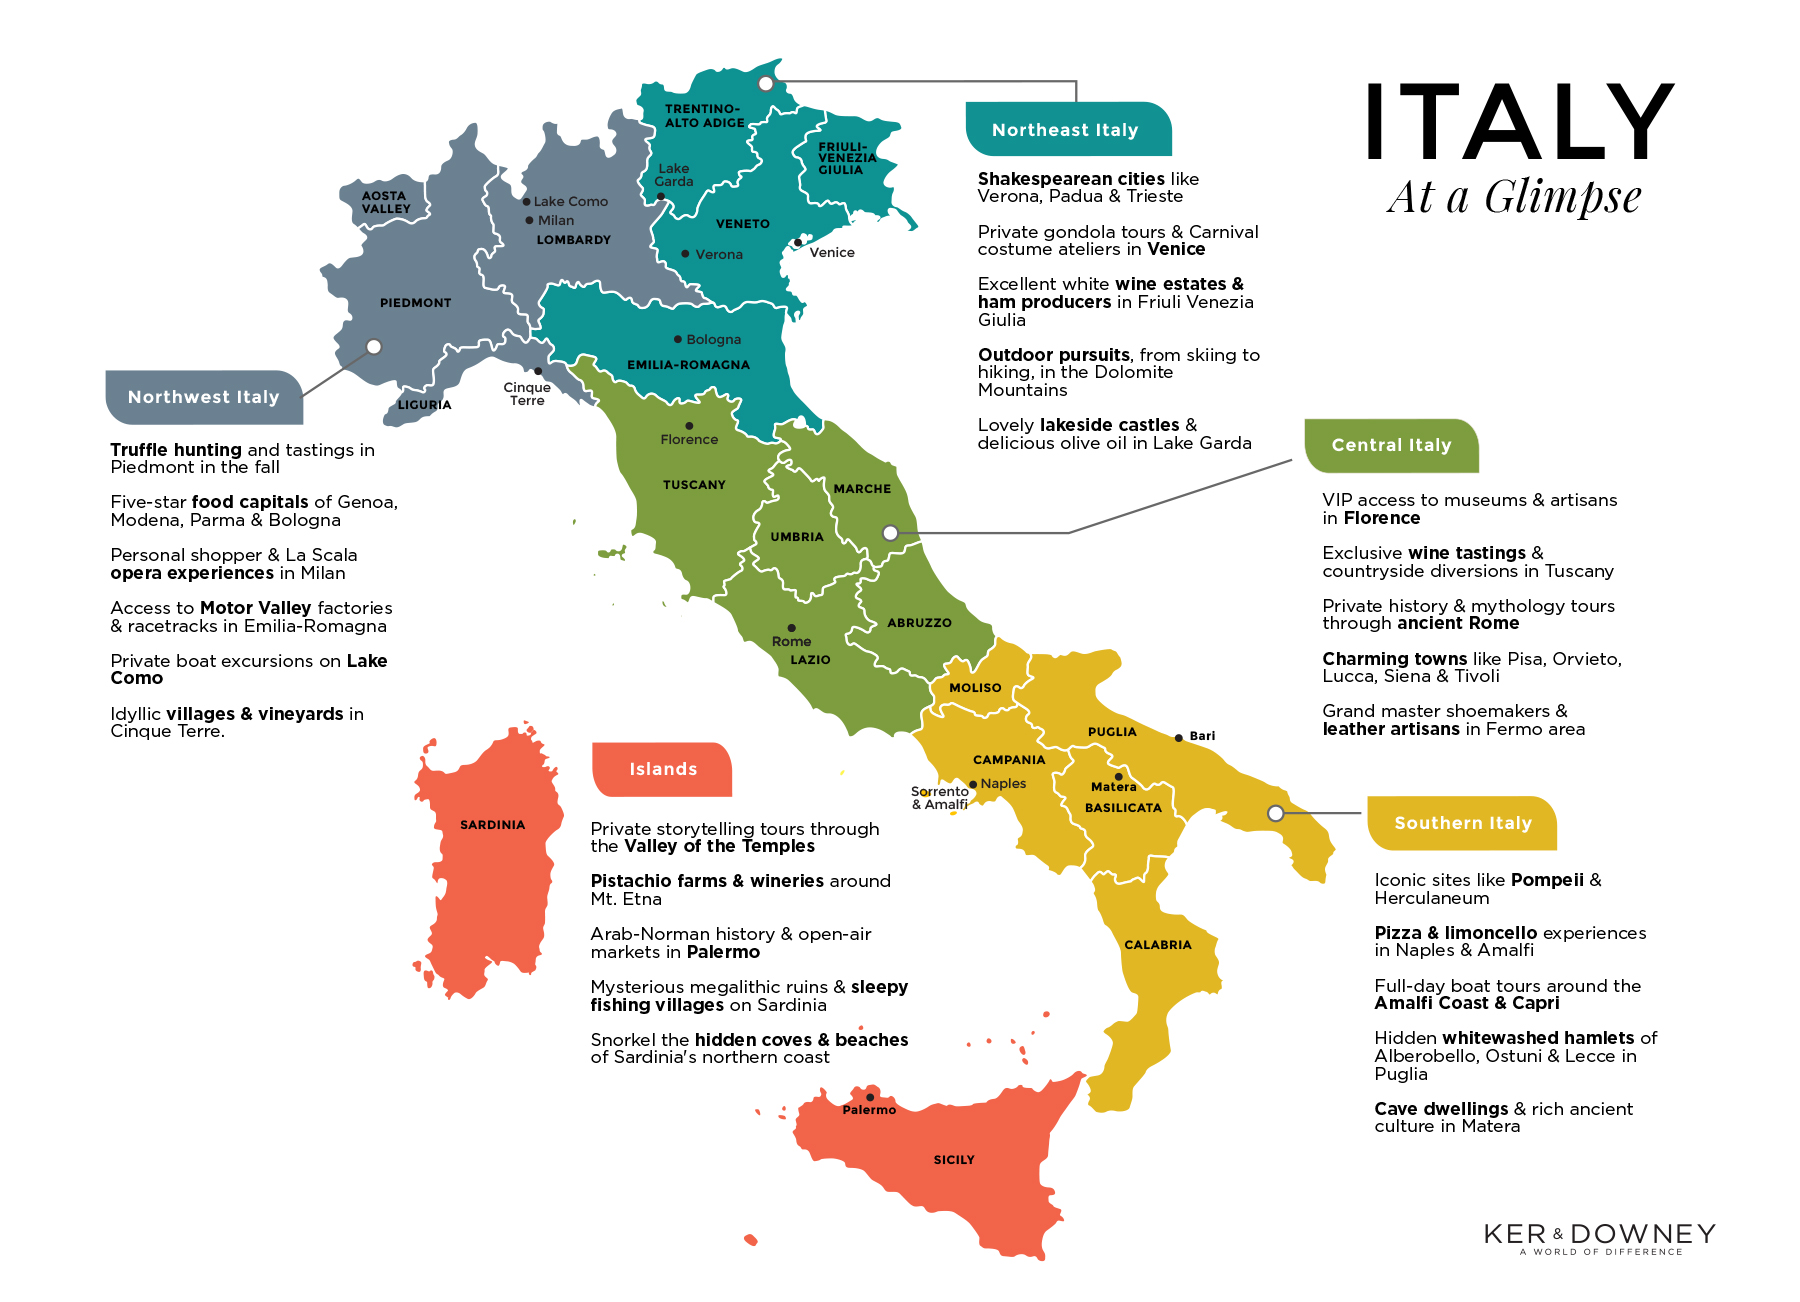 Italy Travel Guide - Ultimate Italy Guidebook - Maps, Facts, Top Places & Itineraries